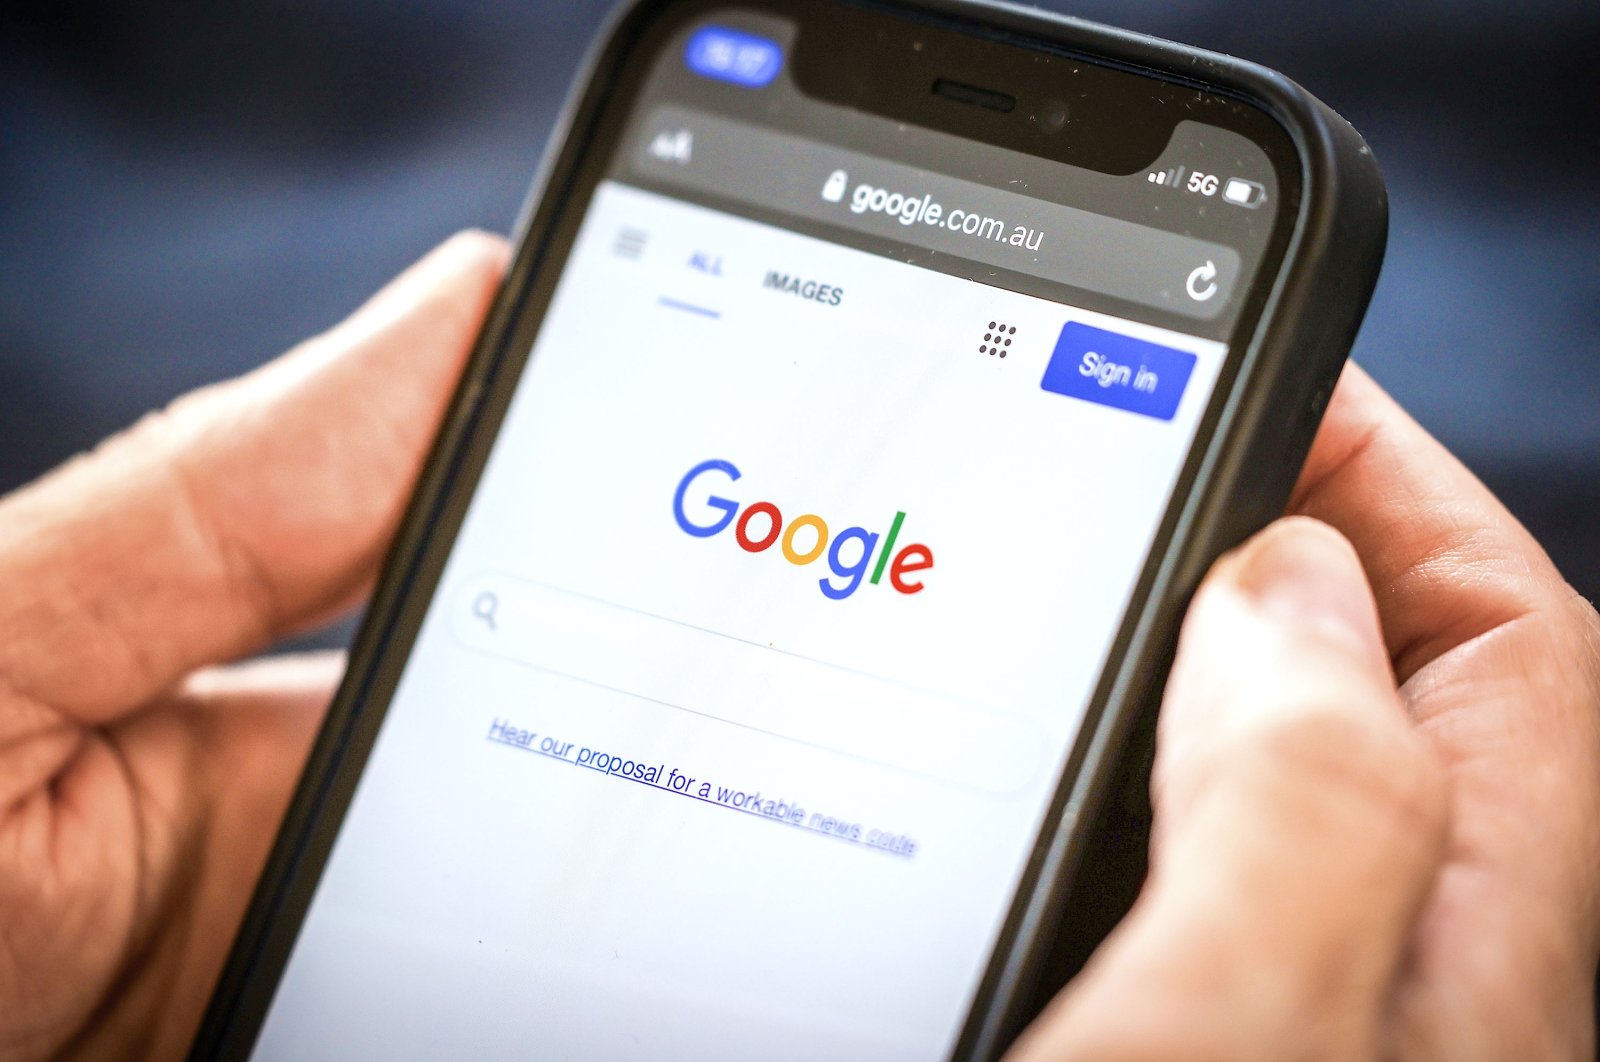 A link to Google's proposal for a workable news code on the company's homepage, arranged on an iPhone in Sydney, Australia, Jan. 22, 2021. (Getty Images)